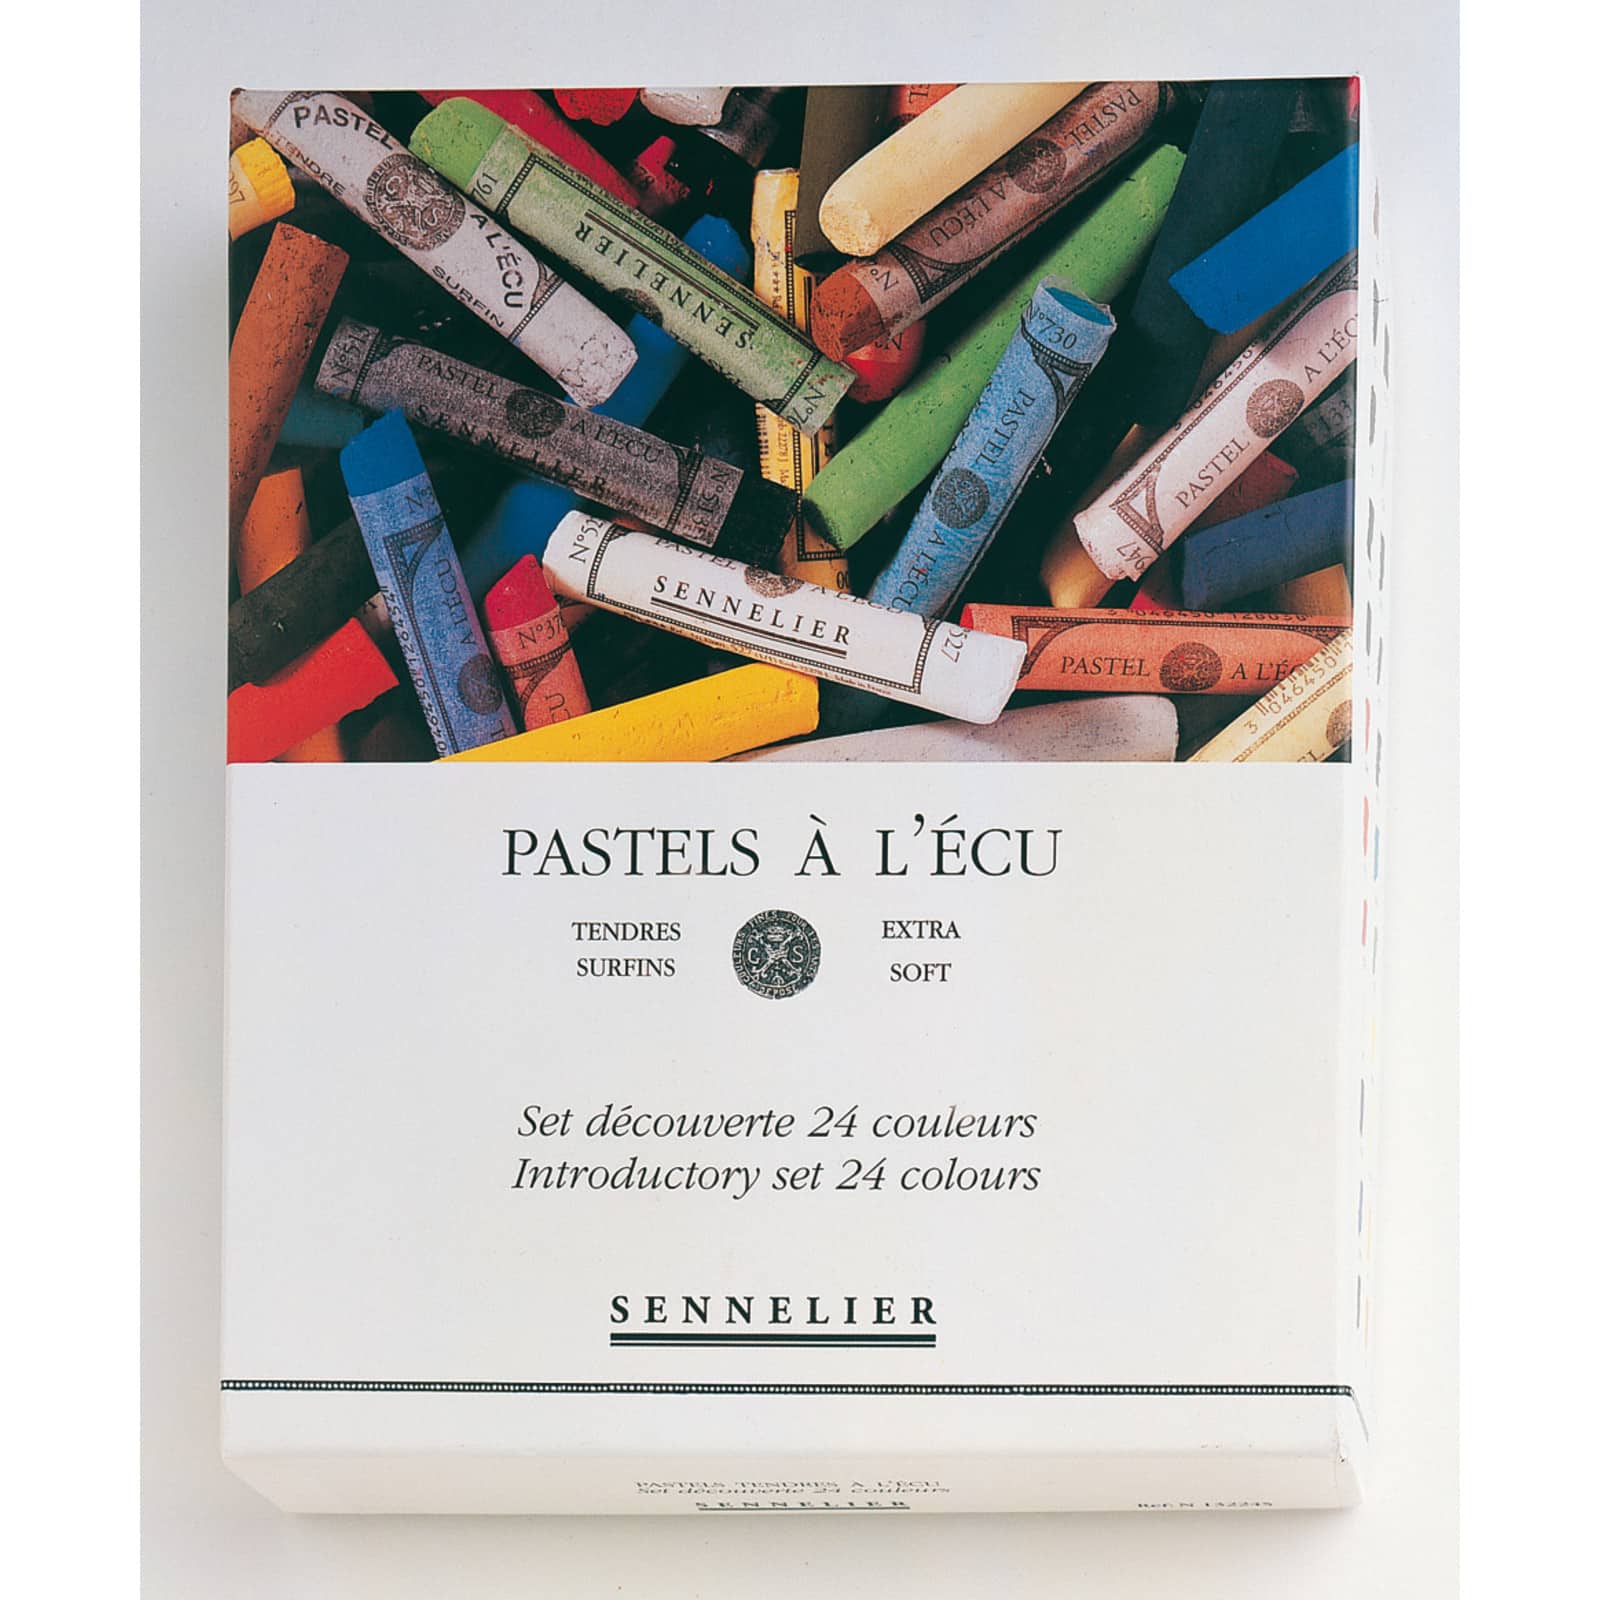 Sennelier 24 Introductory Colors Extra-Soft Pastel Full Stick Set